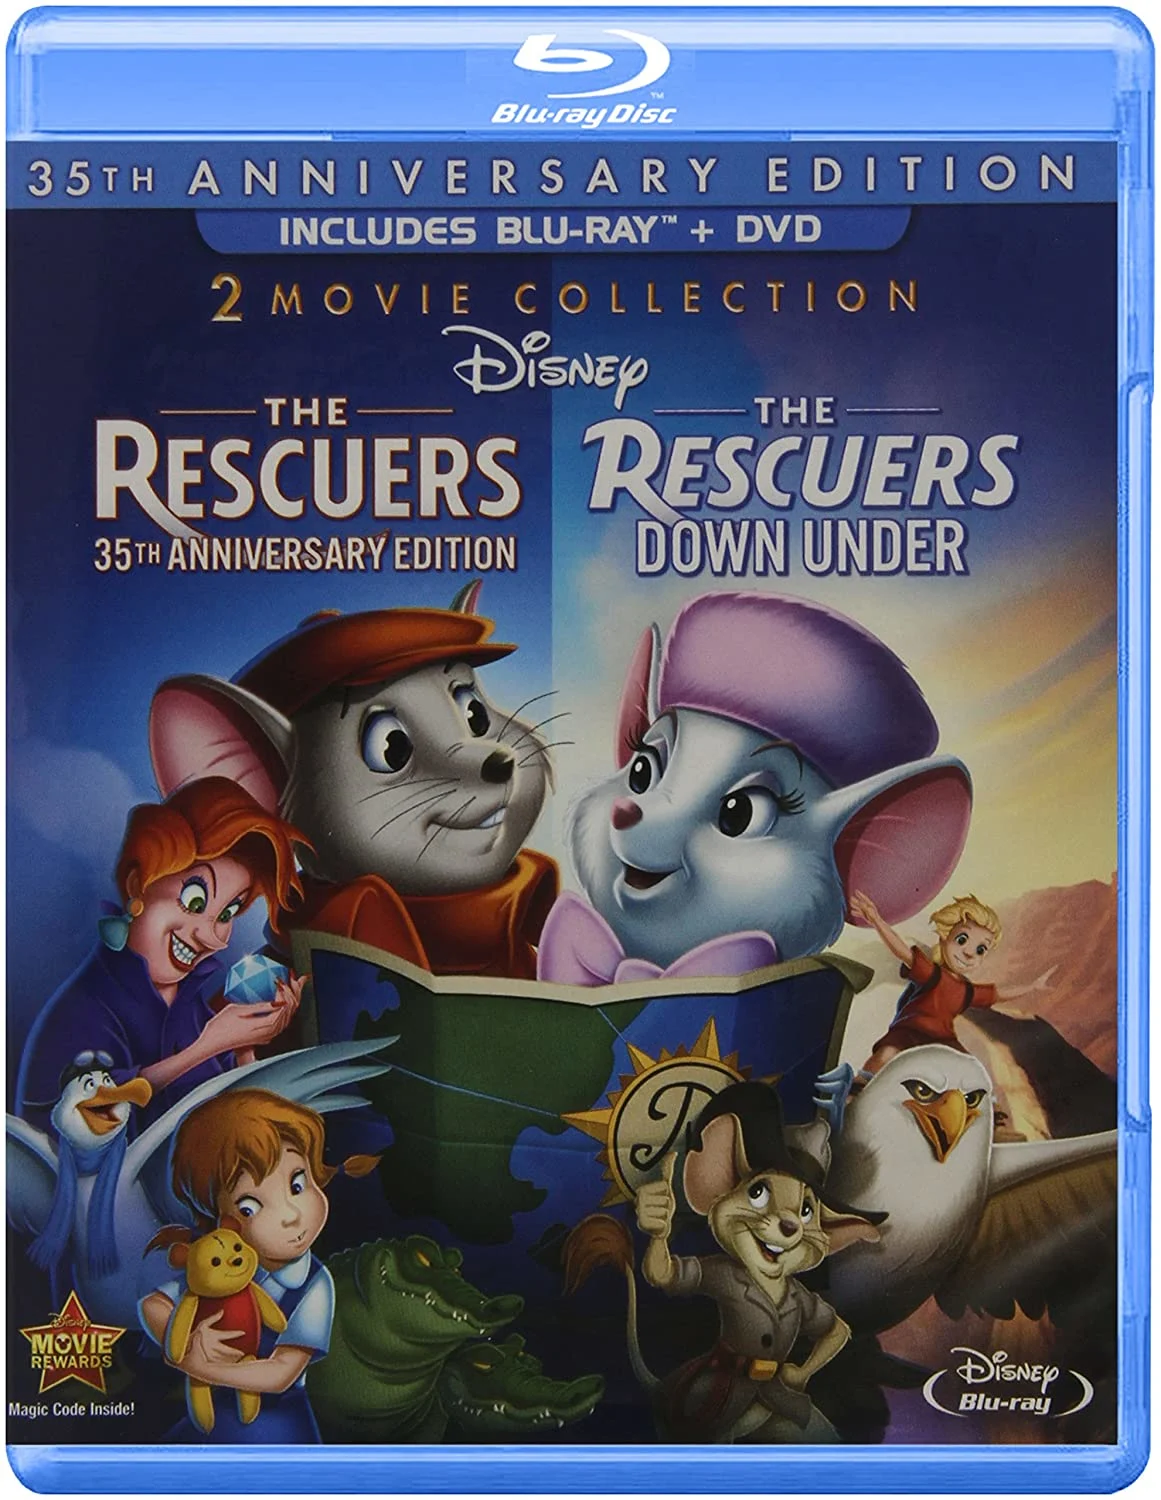 Rescuers, The 35th Anniversary Edition 2-Movie Collection (Blu-ray) on MovieShack